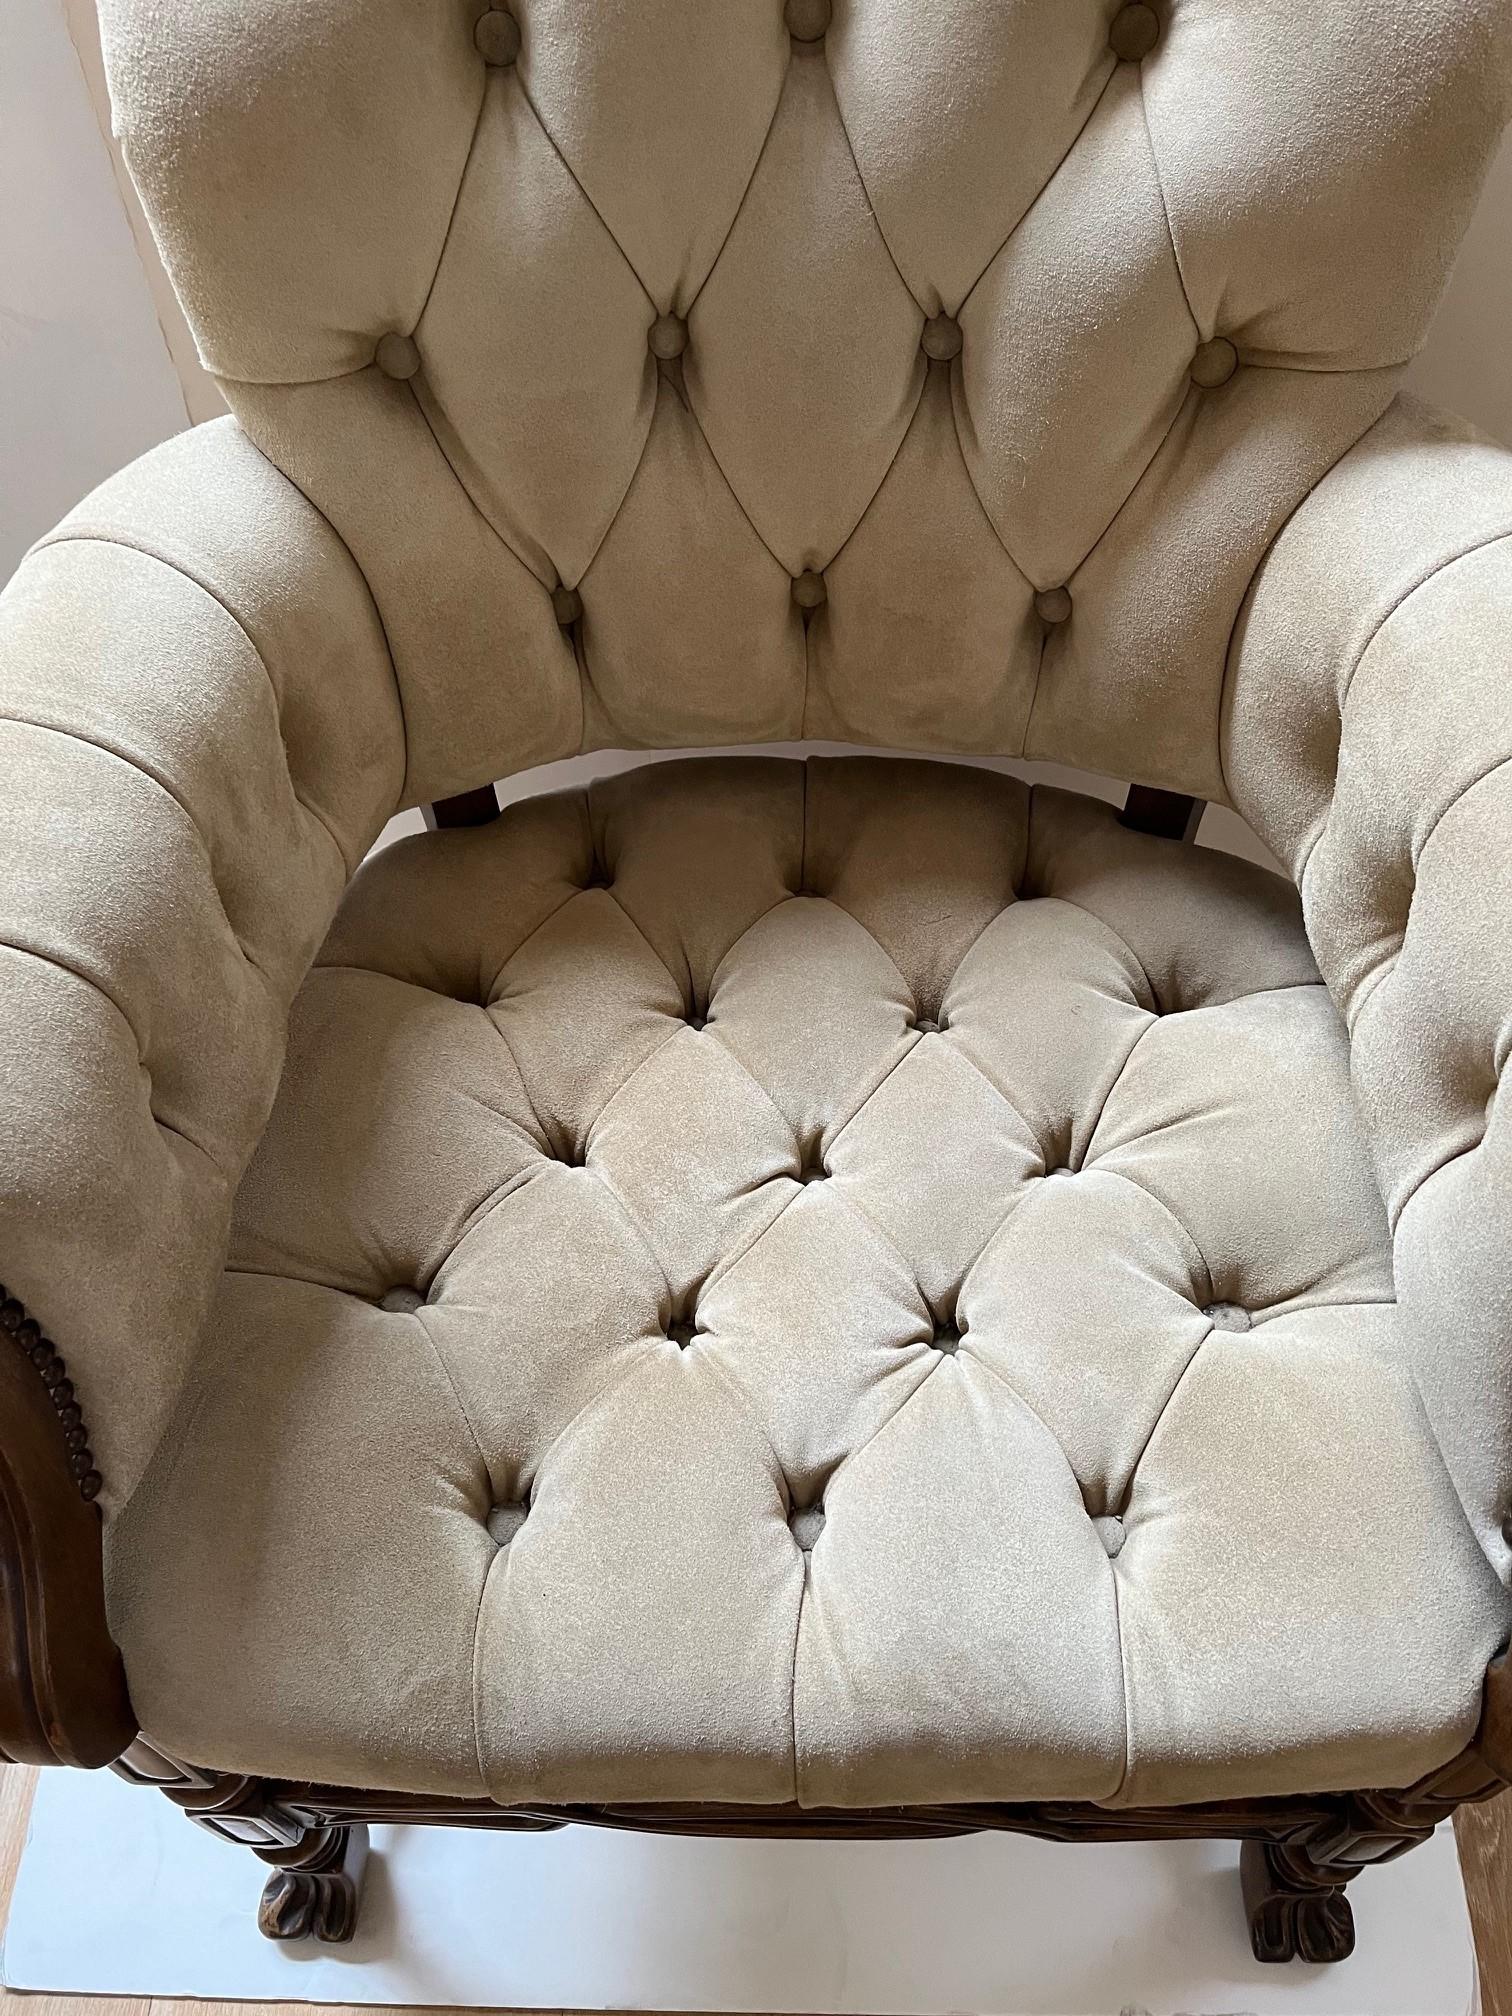 Fabriqué sur commande Elegant Seville Armchair Upholstered in Beige Suede Leather, Tufted Seat and Back, Antique Brass Nail Head Trim at Seat, Arms, and outside back, Carrure en bois dur sculpté avec Front Stretcher Finished in Medium Walnut. Il